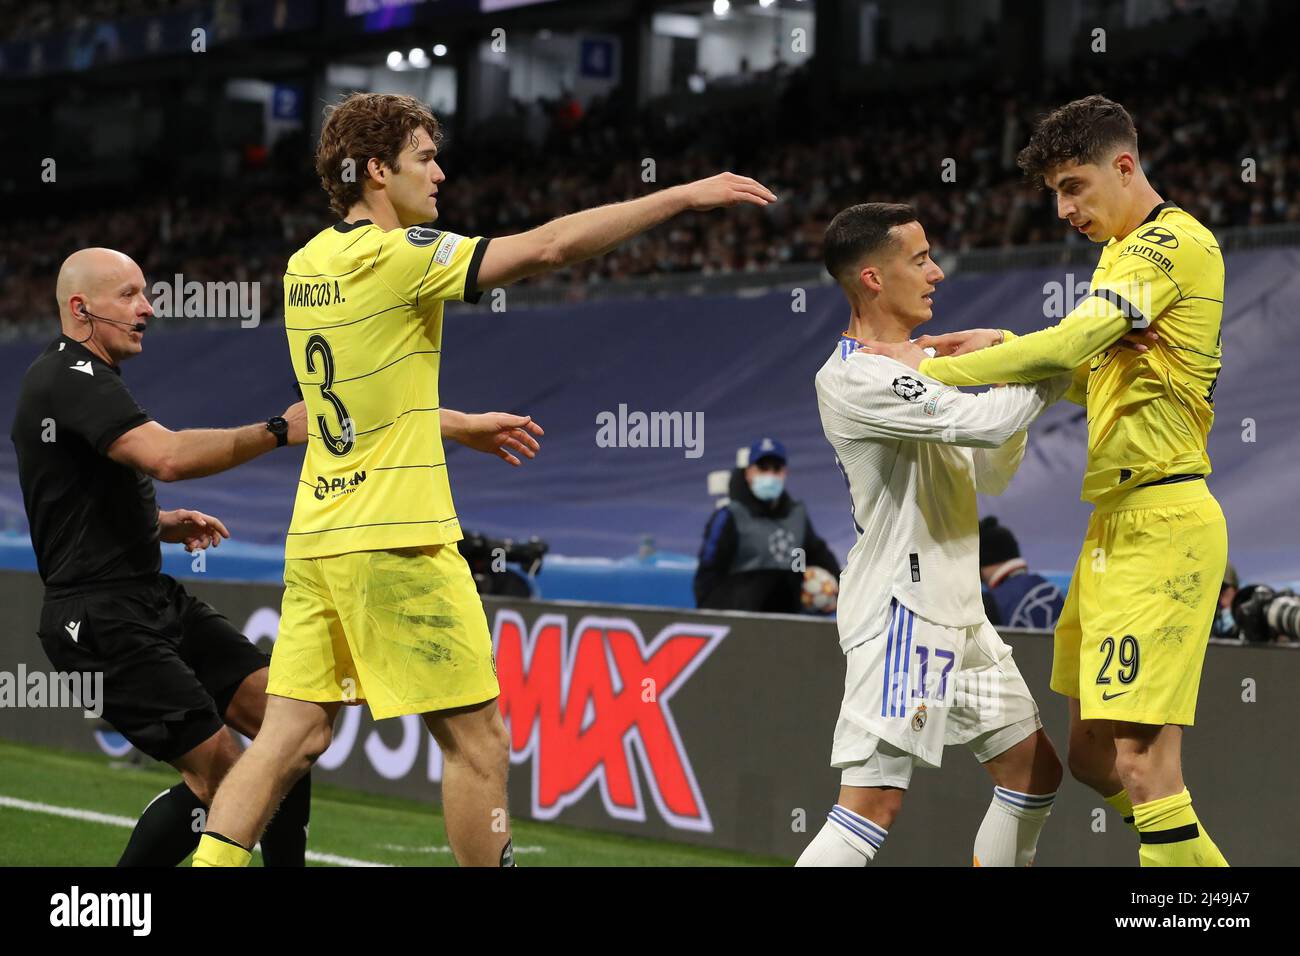 Madrid, Spain. 12th Apr, 2022. Marcos Alonso of Chelsea FC and the referee  Szymon Marciniak of Poland move in to break up a clash between Lucas  Vazquez of Real Madrid and Kai